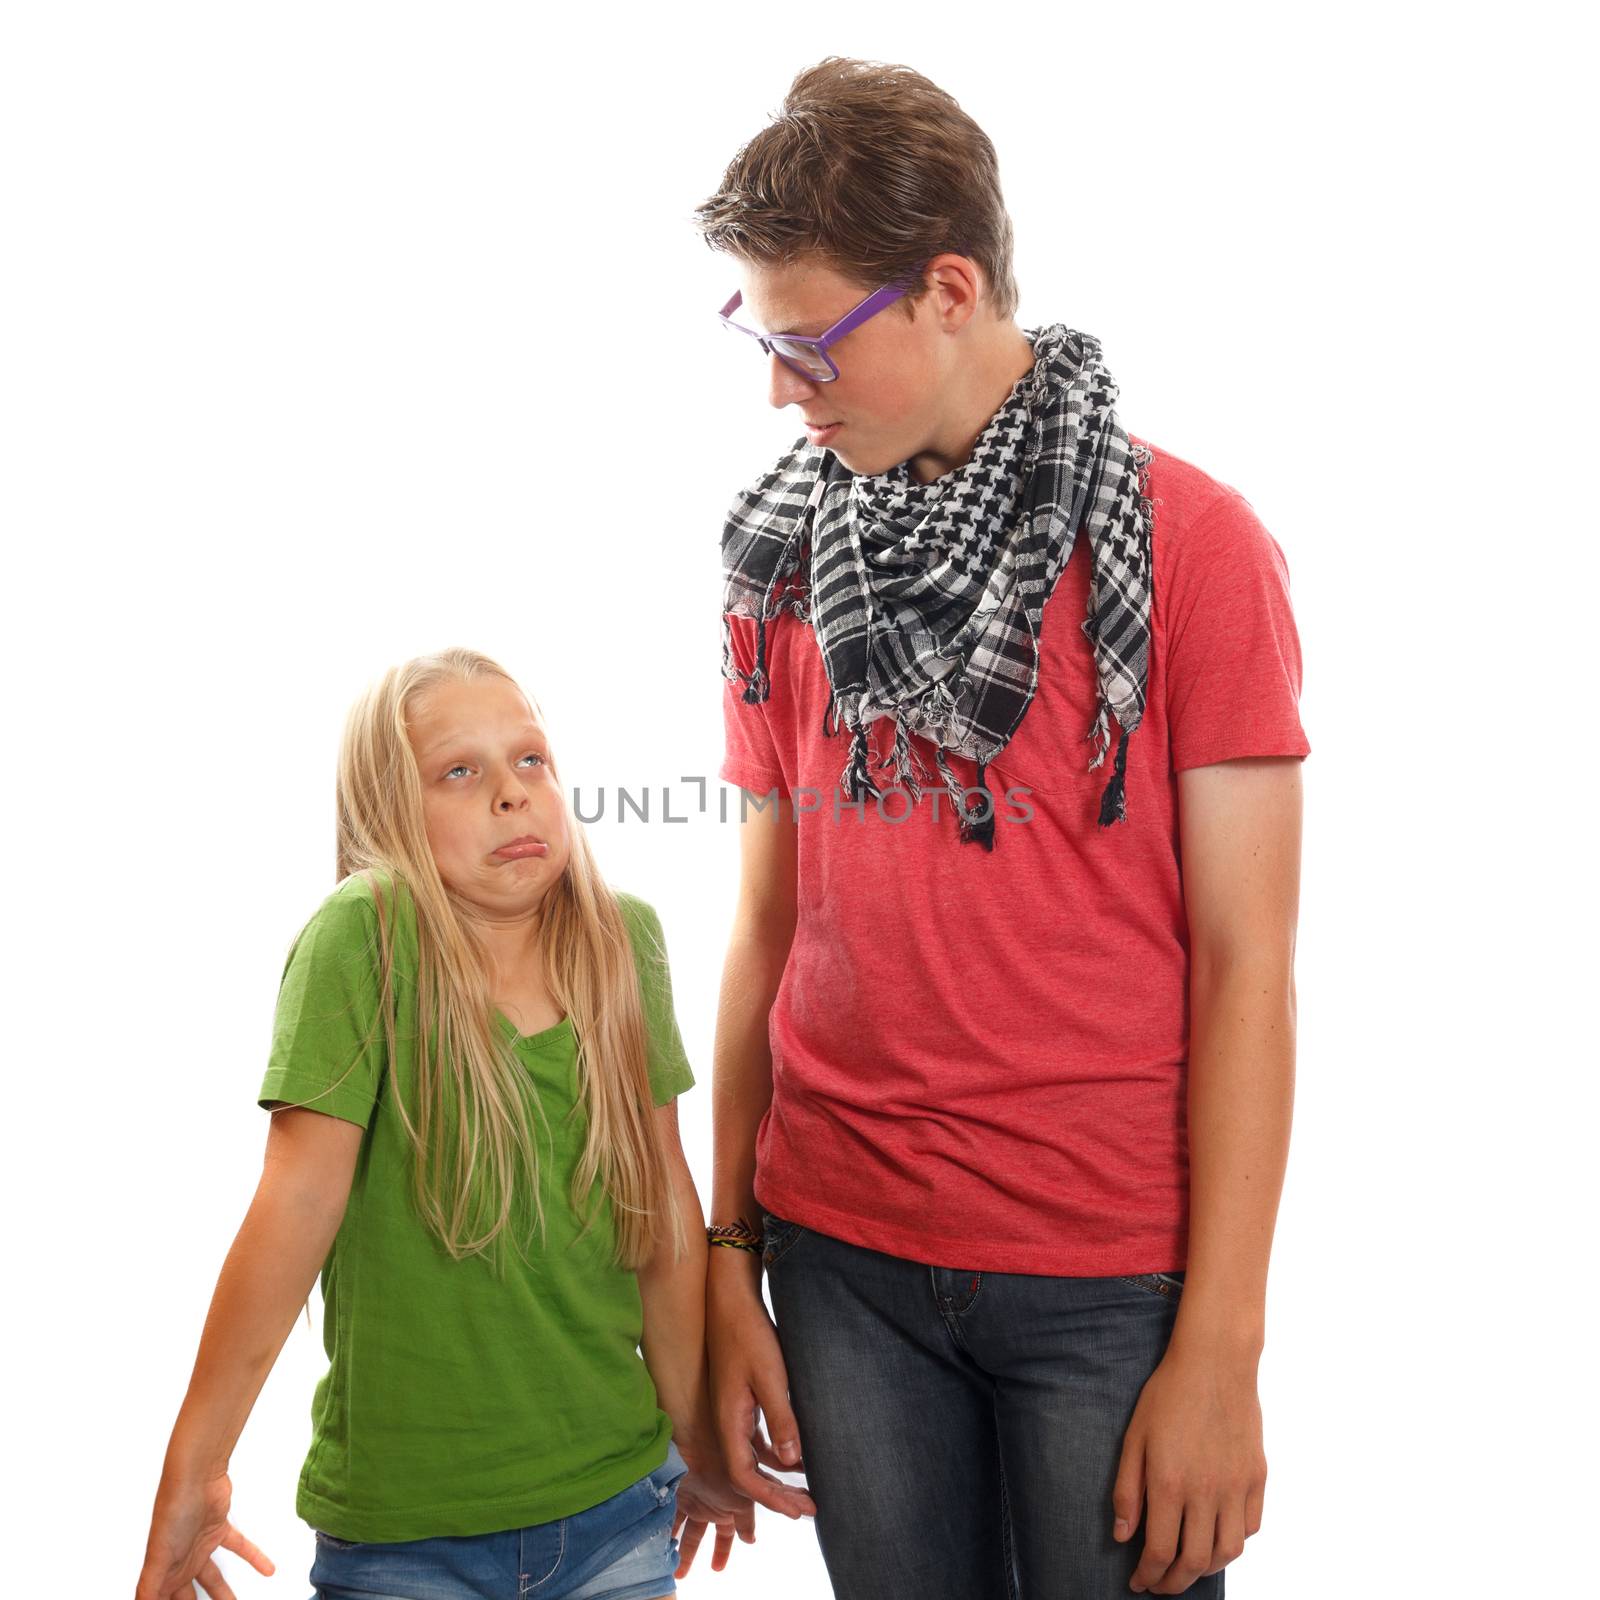 A hipster teen boy and a young girl